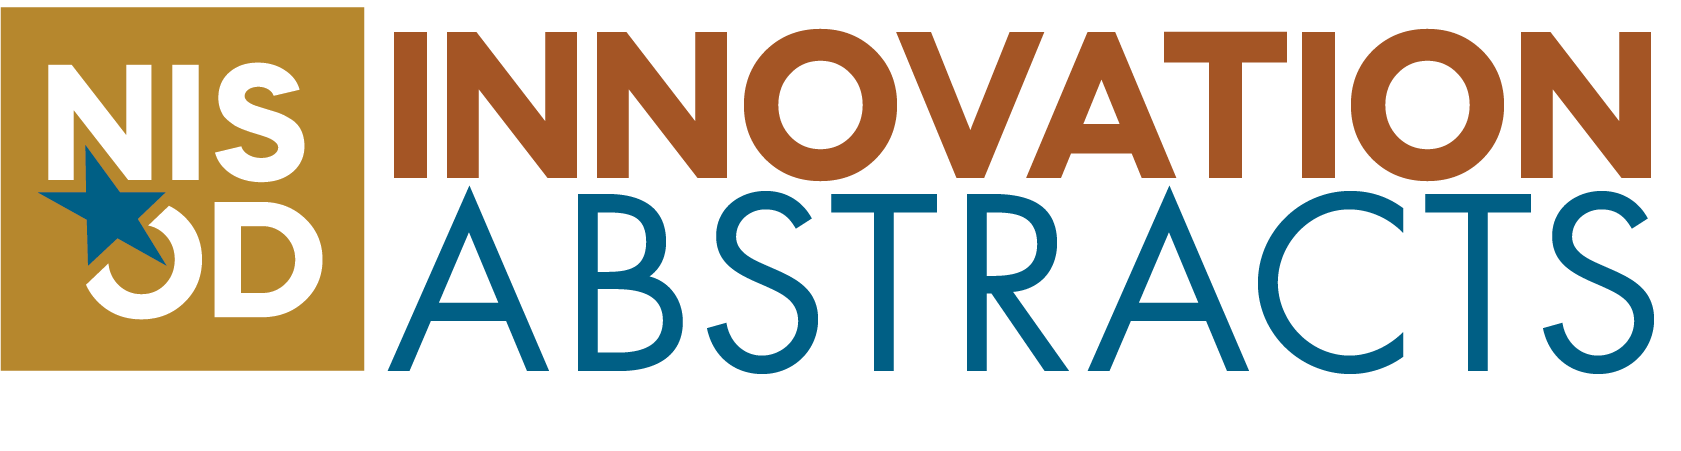 Innovation Abstract banner